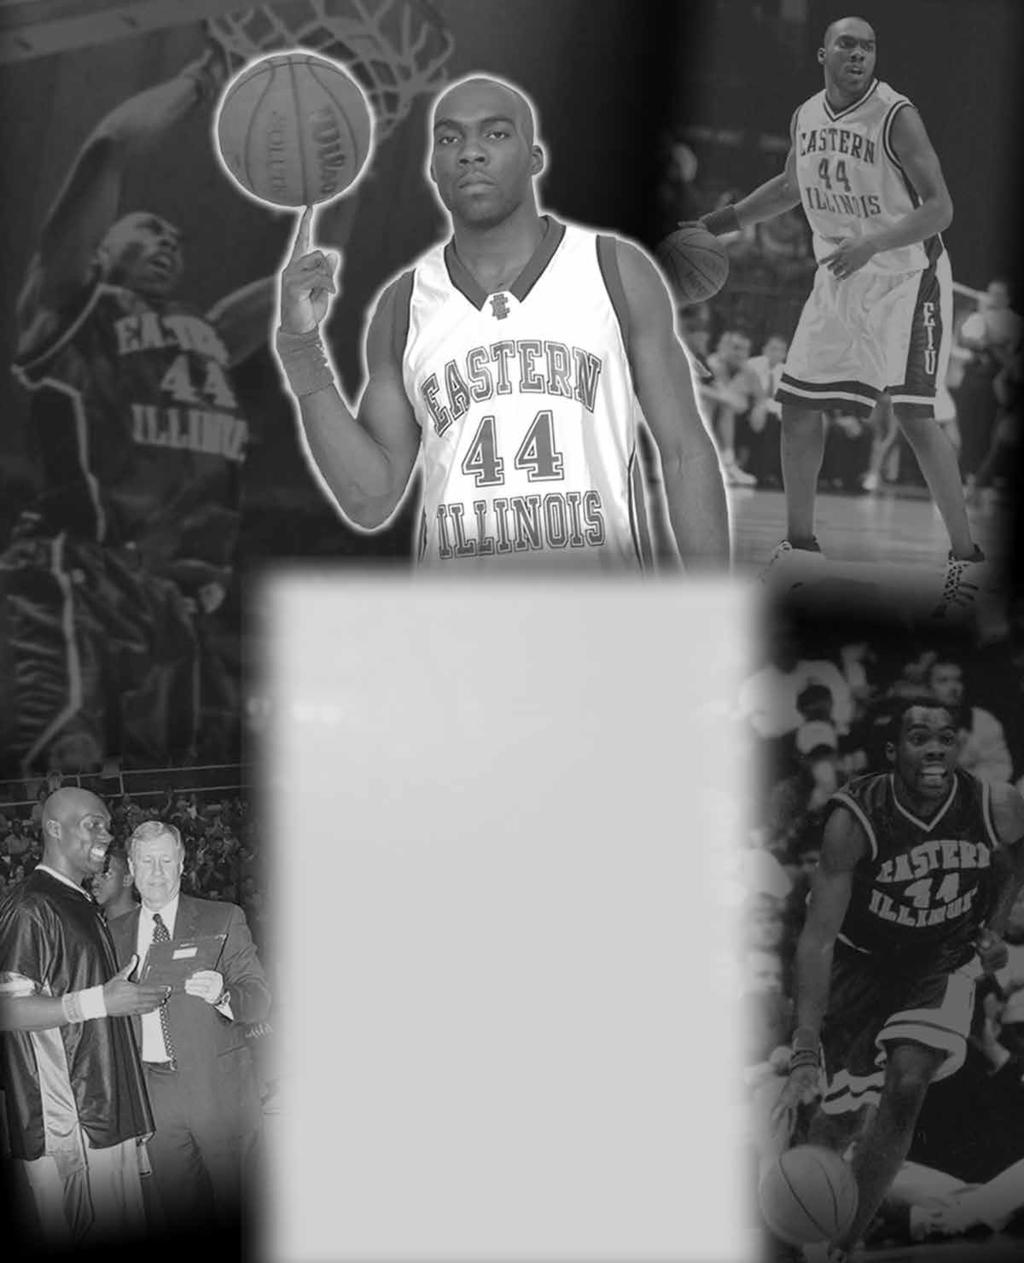 EASTERN ILLINOIS BASKETBALL LEGENDS THE HENRY DOMERCANT LEGACY All-American HENRY DOMERCANT S four year career (2000-03) resulted in the most prolific scoring performance in Eastern Illinois